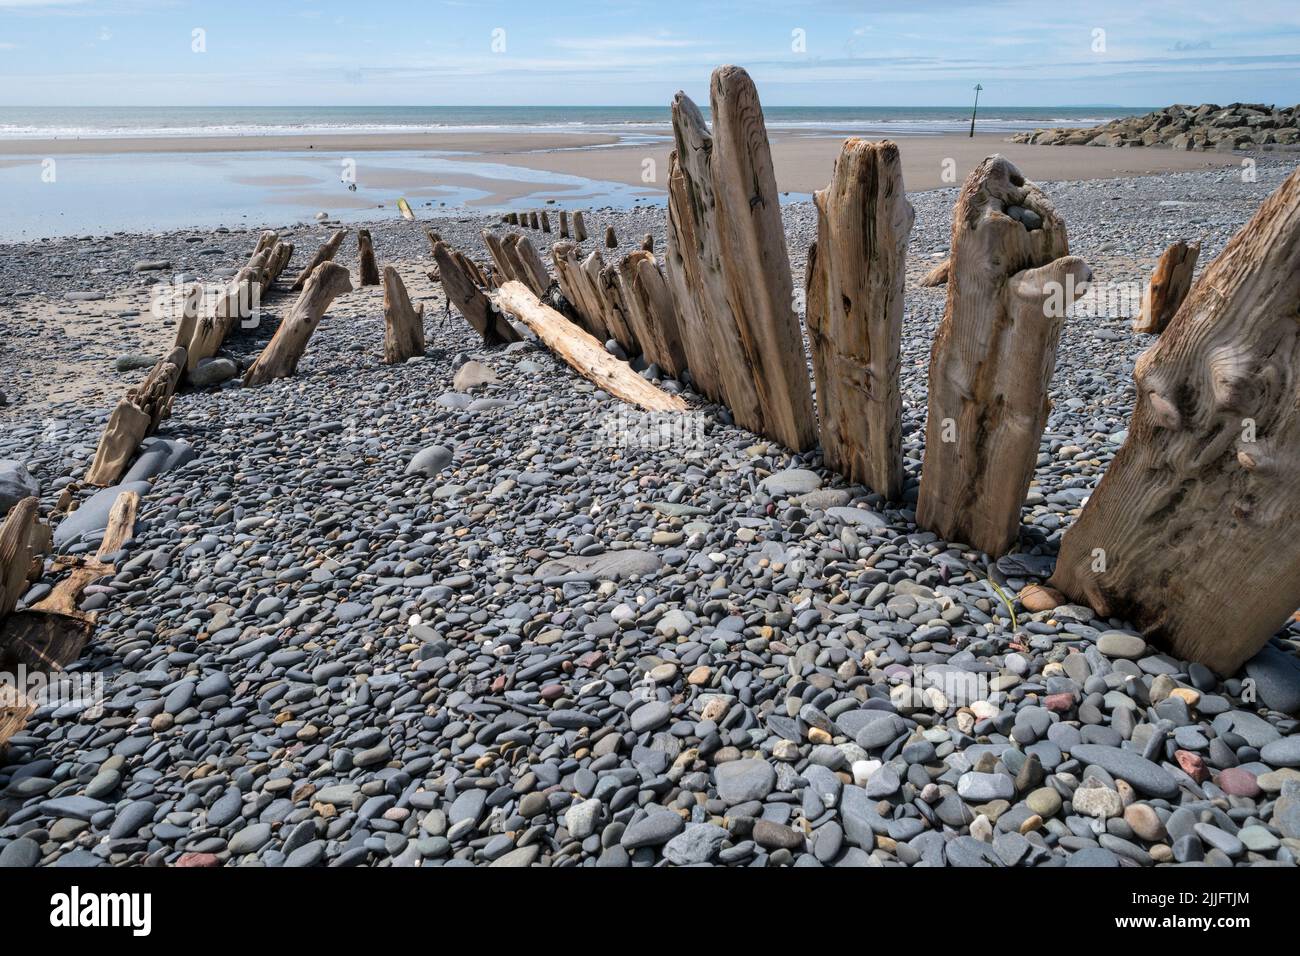 The wooden ribs of an old ship half-buried in the beach at Borth, Ceredigion, Wales Stock Photo